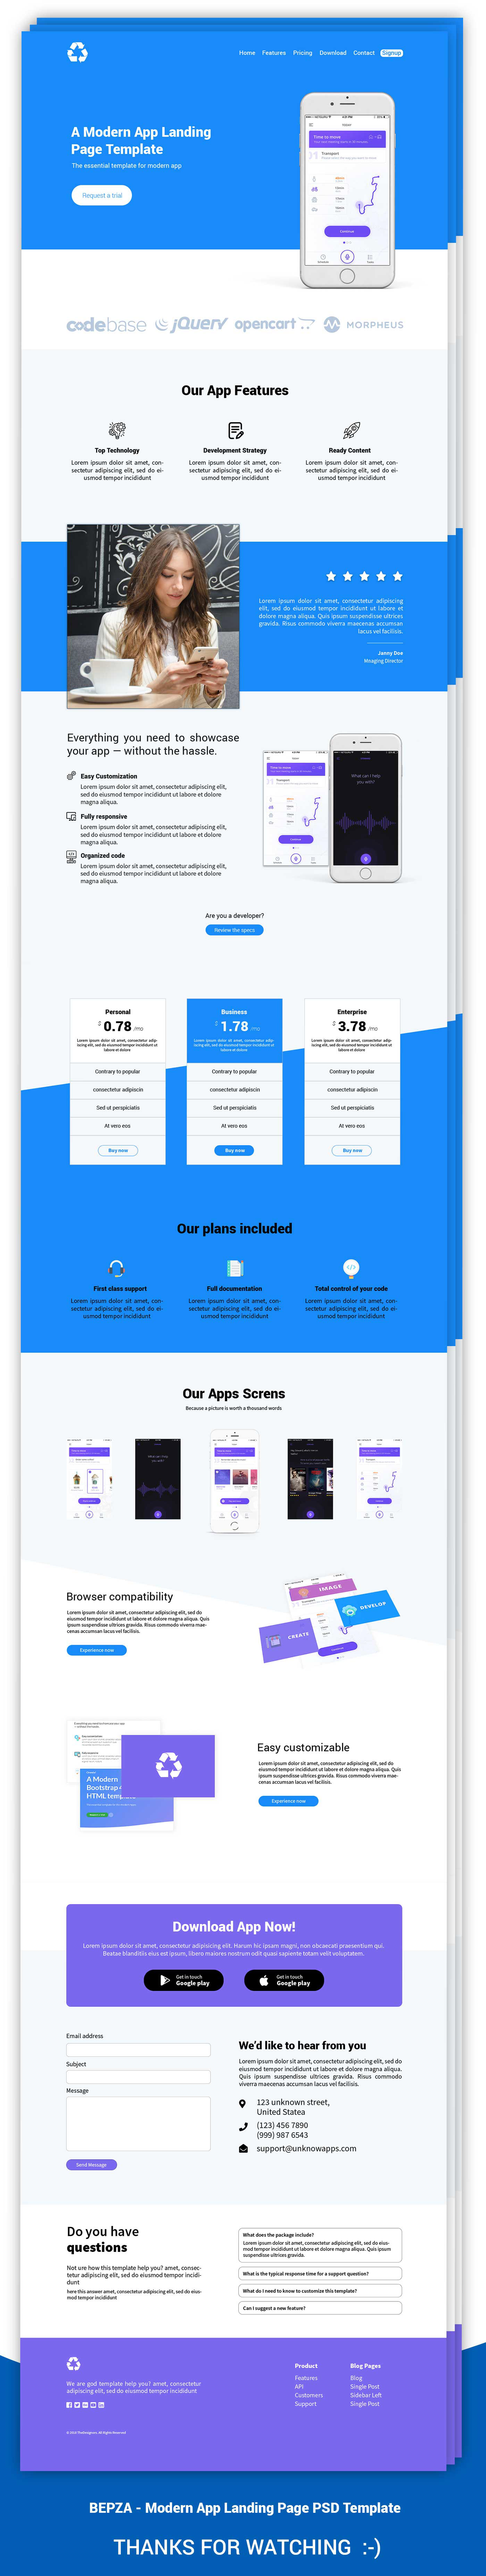 Adobe Photoshop landing page App Landing Page Free psd template Free Template Download landing page psd psd template